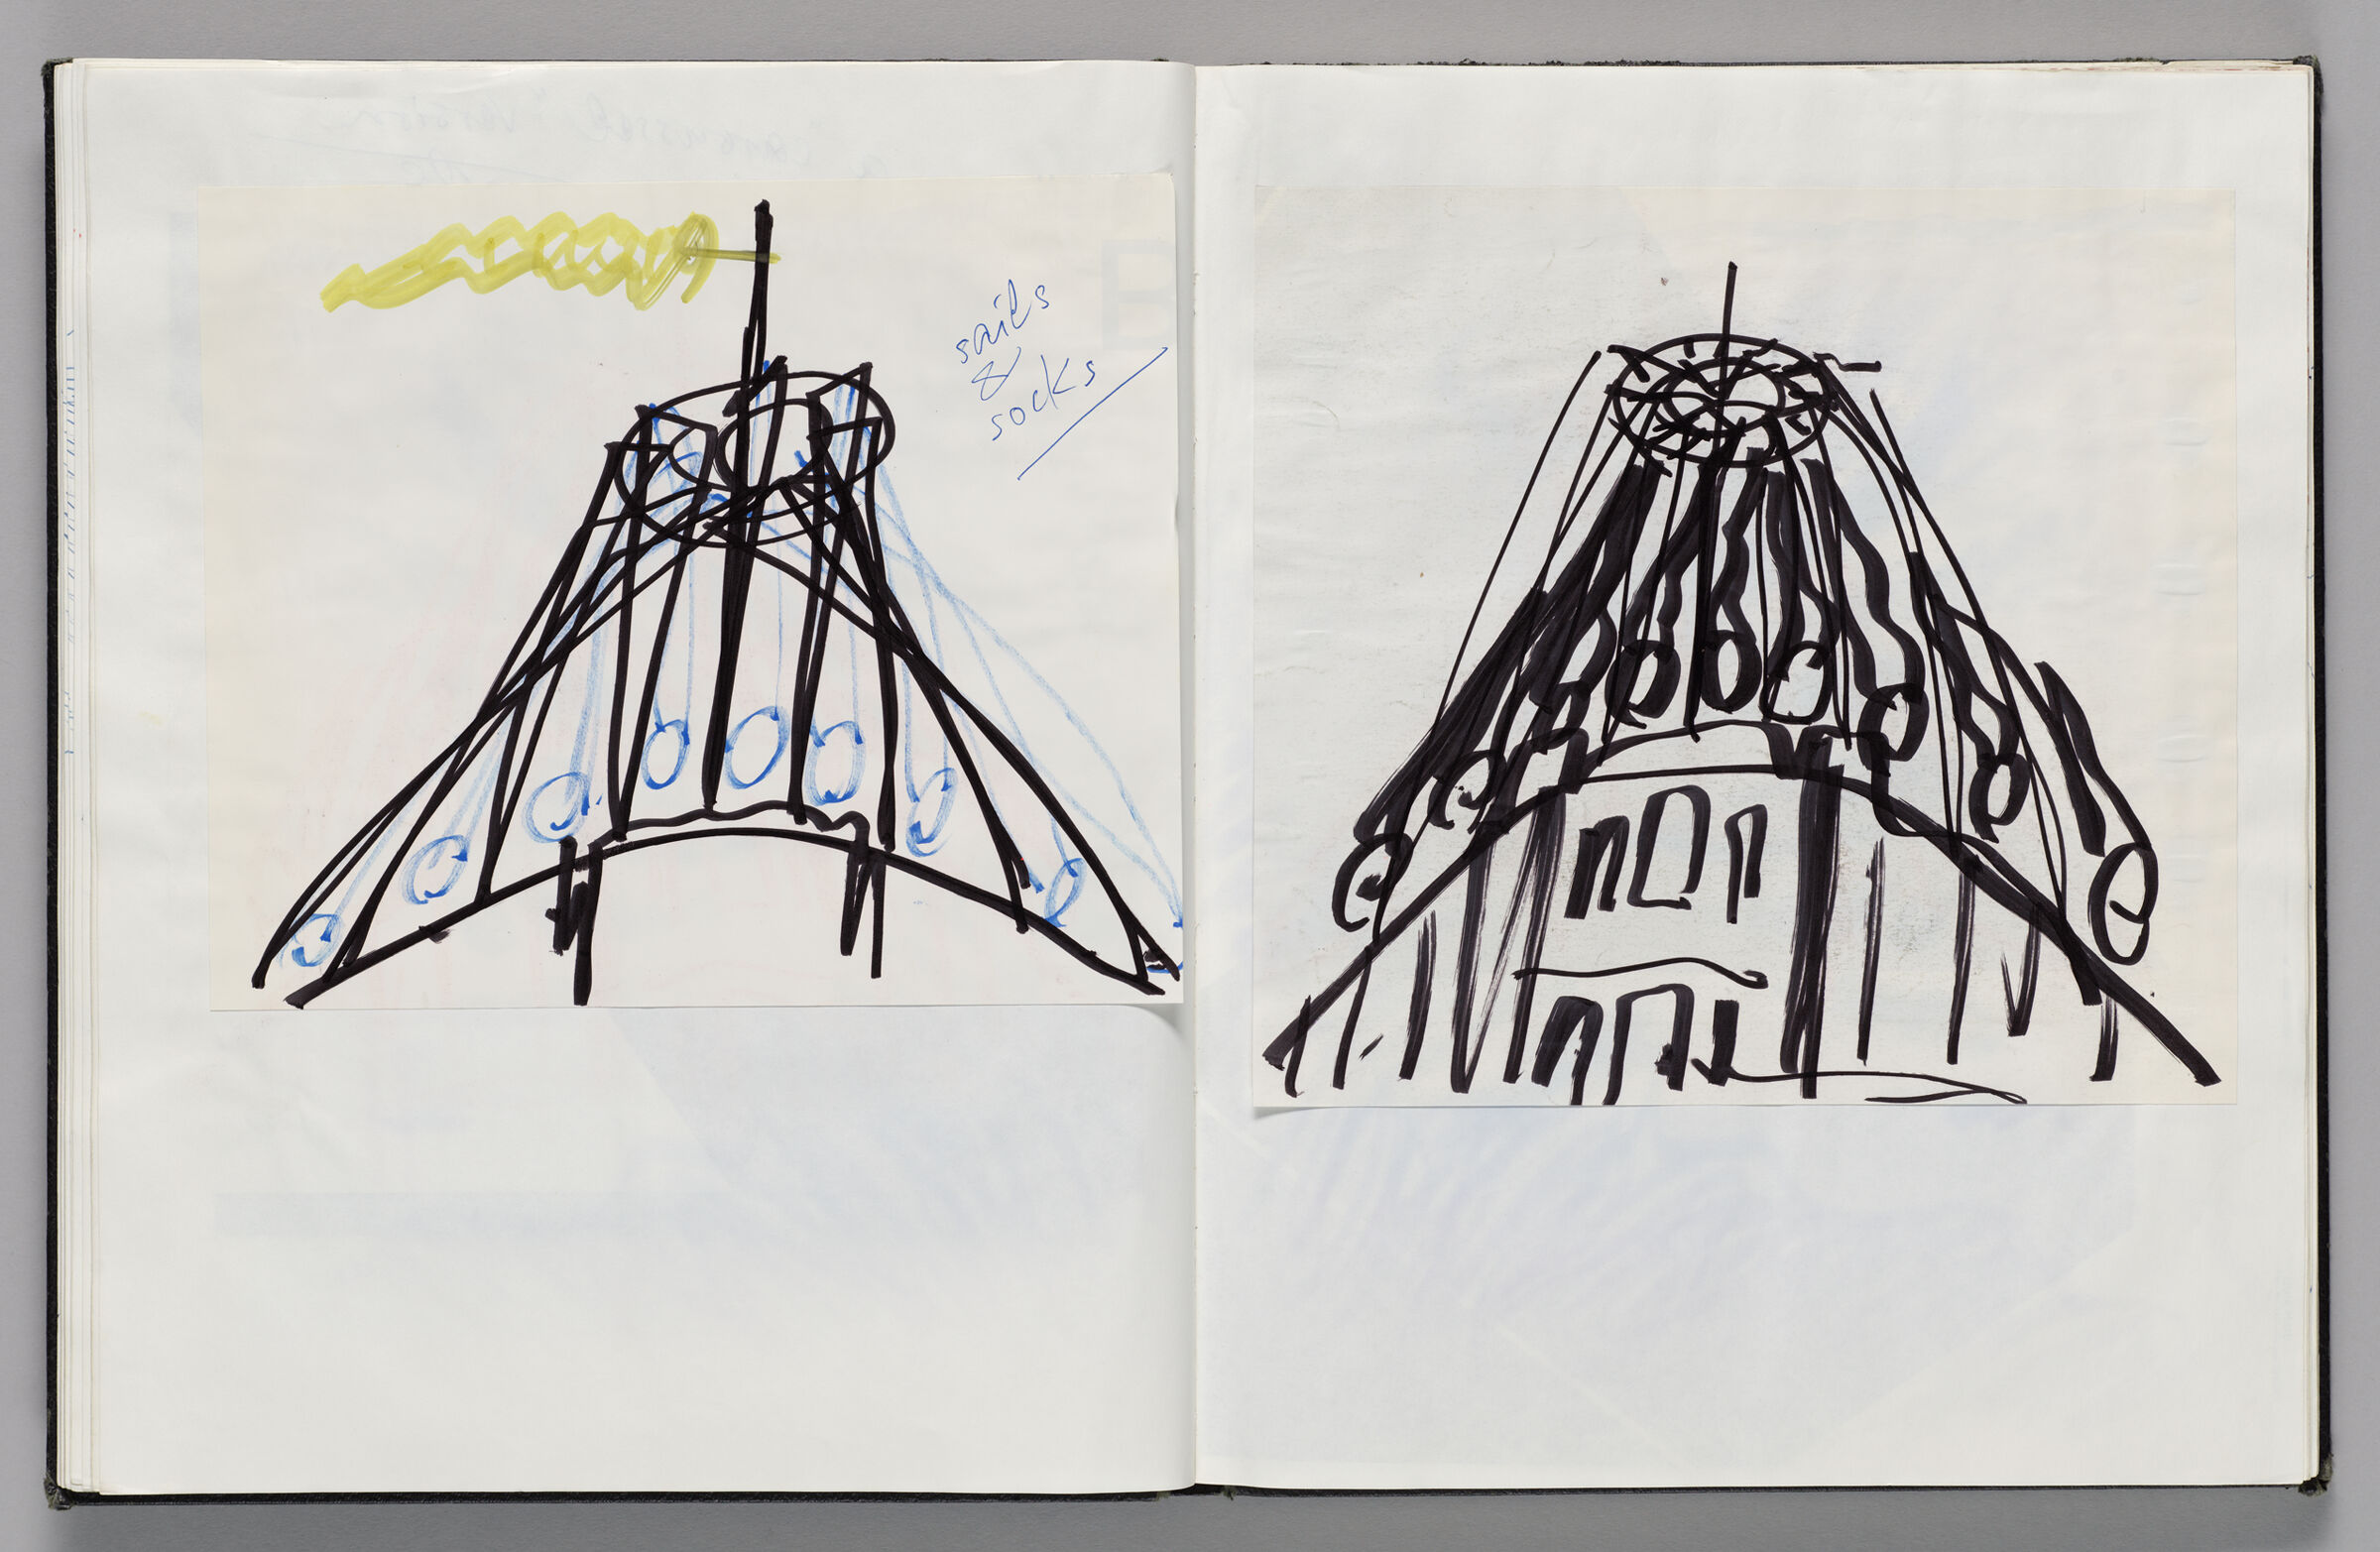 Untitled (Pasted Sketch With Note, Left Page); Untitled (Pasted Sketch, Right Page)